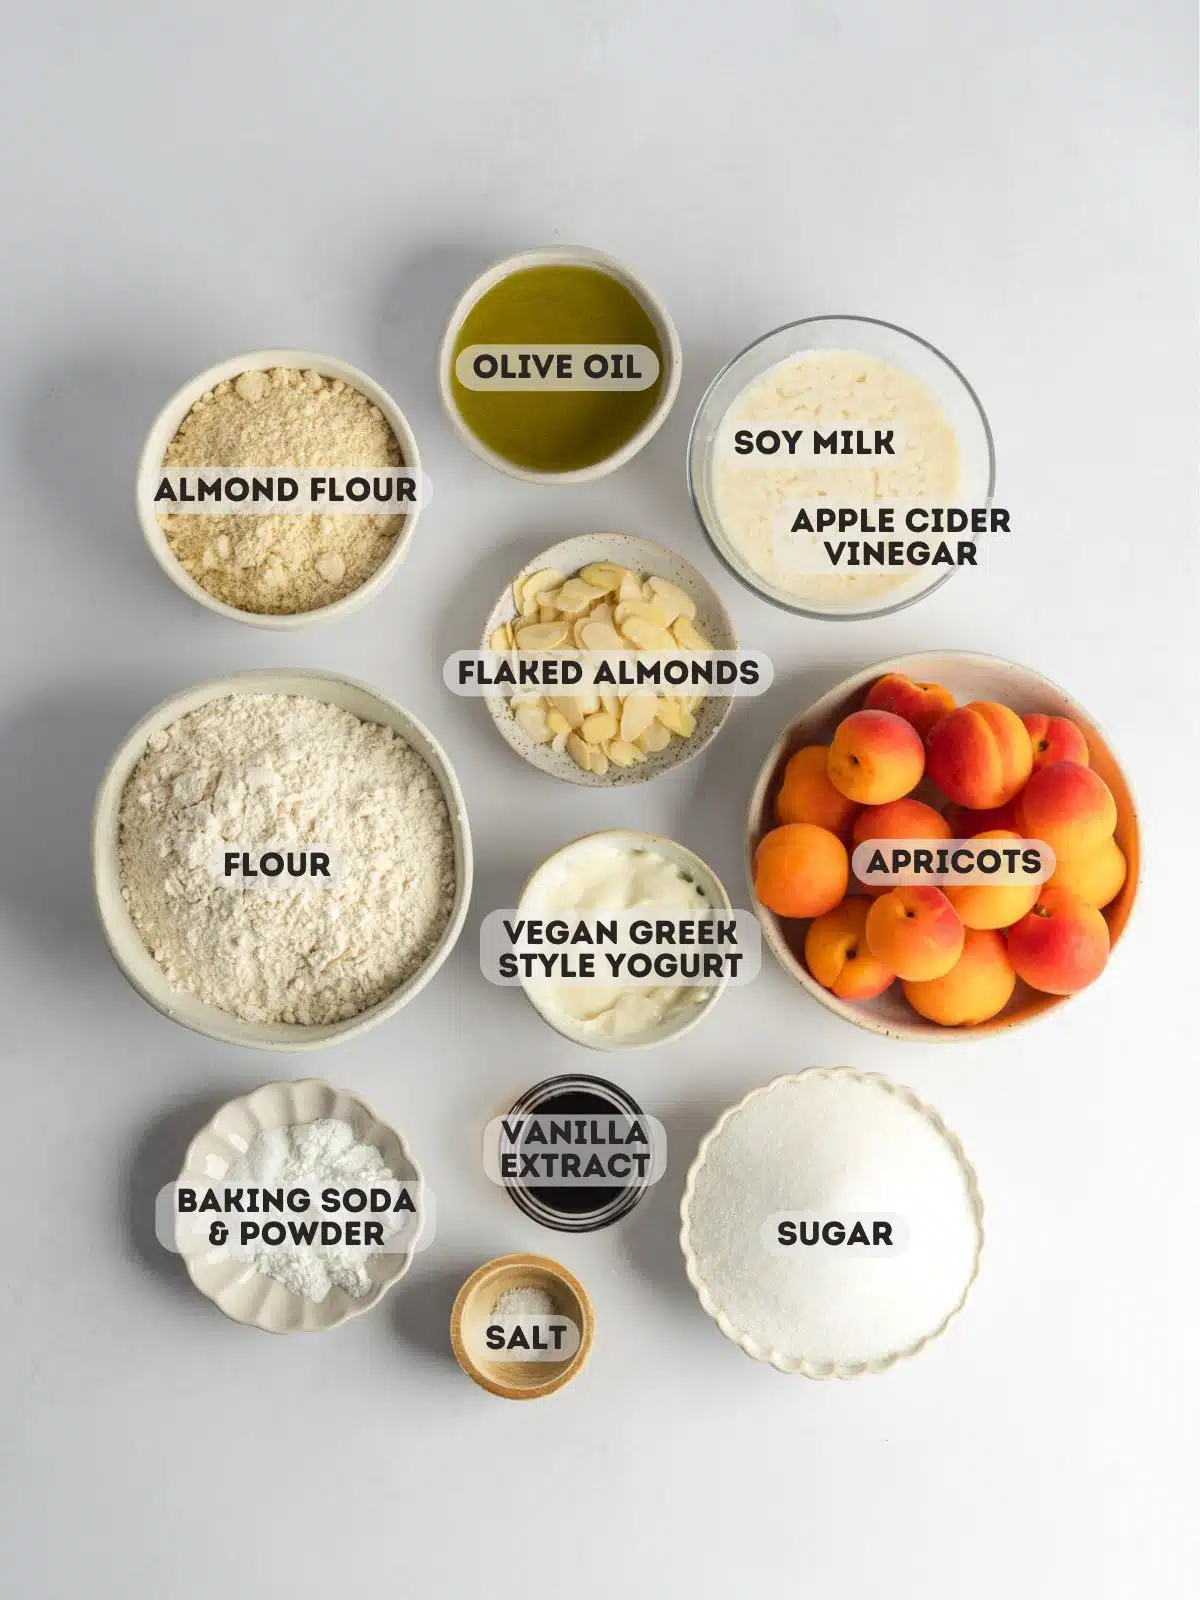 ingredients for vegan apricot bread measured out in bowls on a gray surface.